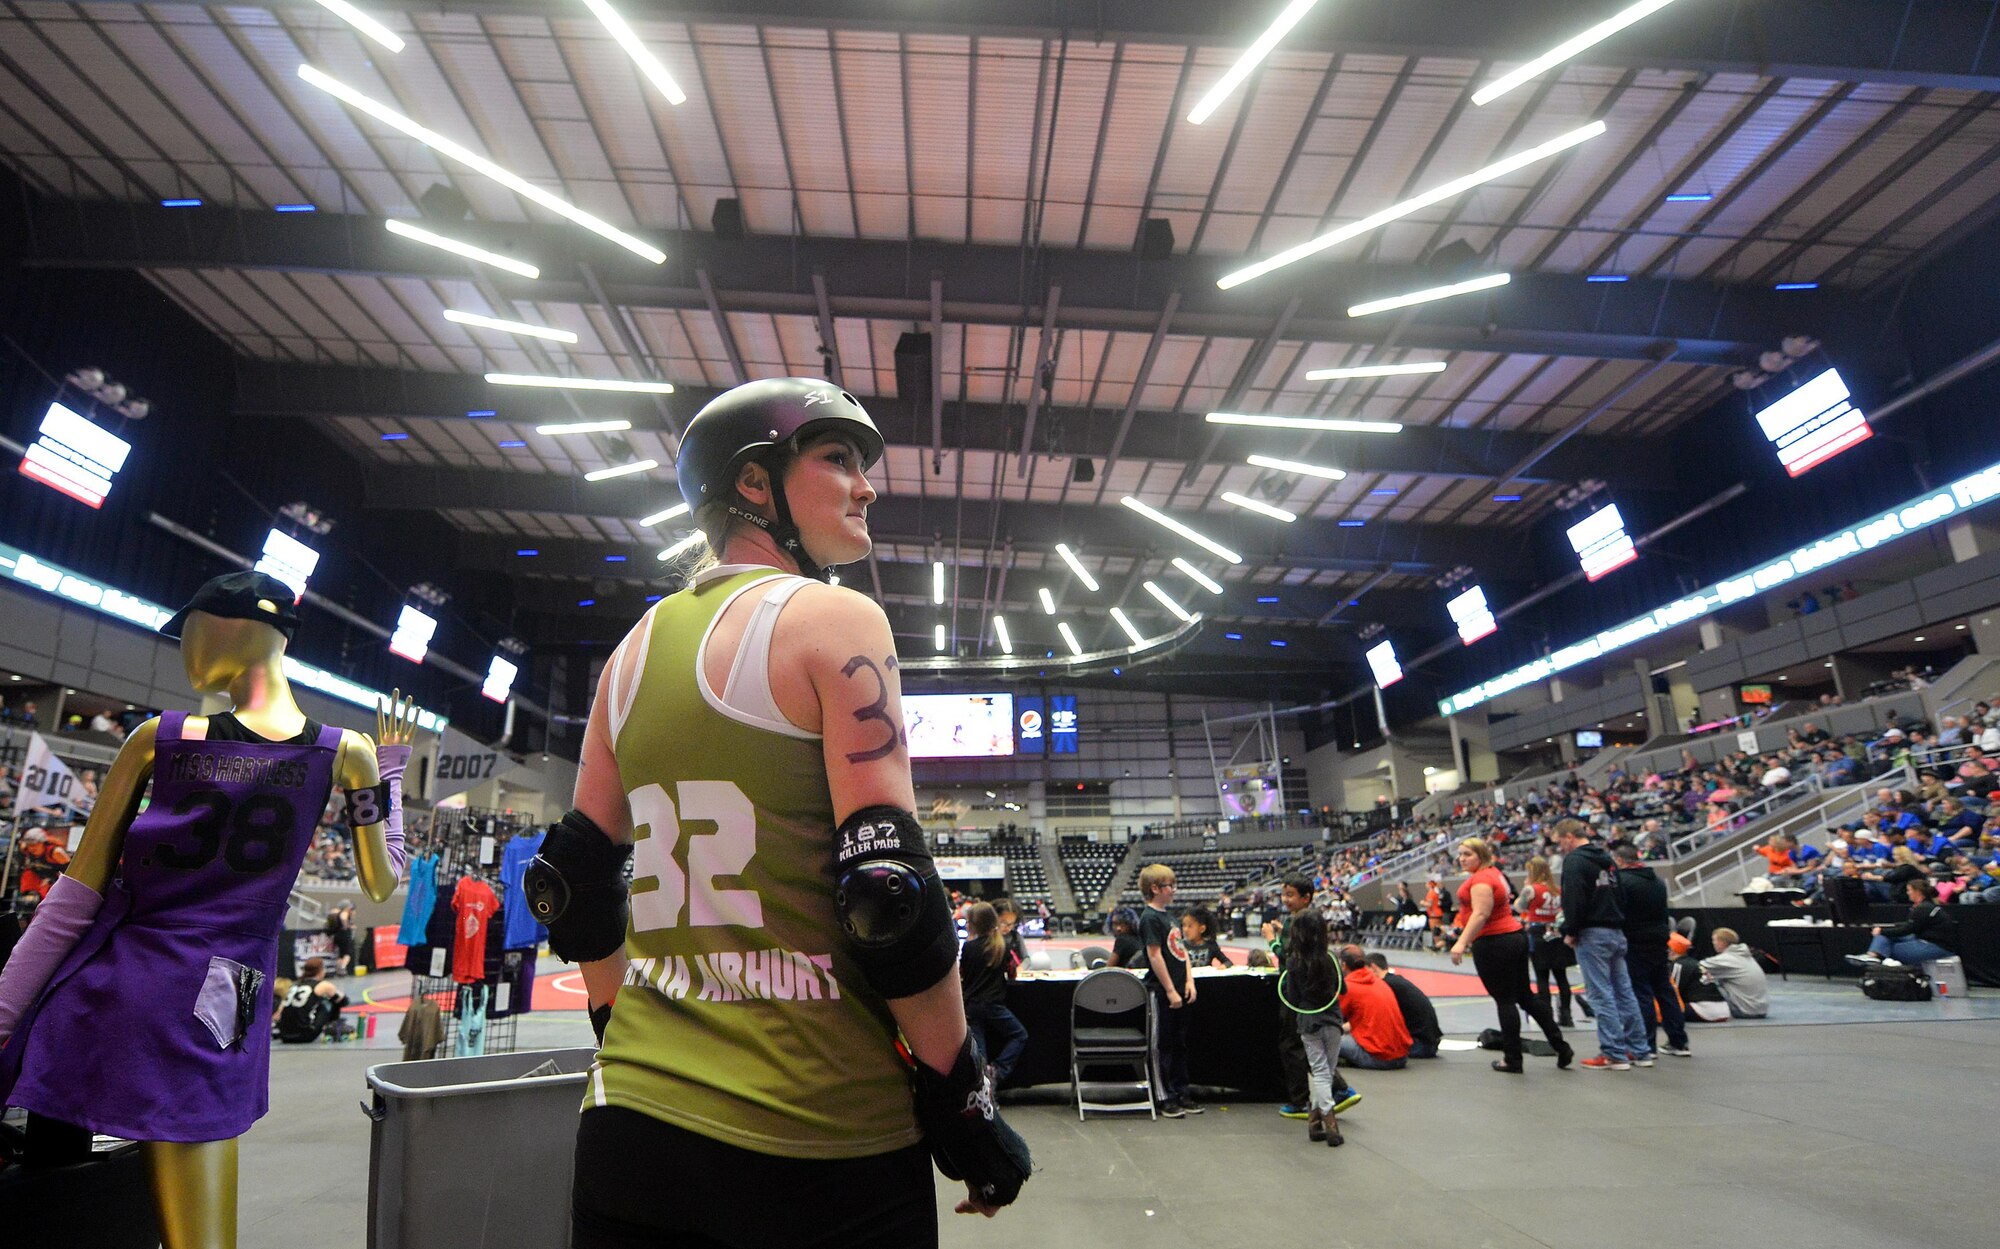 U.S. Air Force Maj. Jocelyn Smith, an executive officer with the 55th Wing Headquarters, looks over her shoulder at the scoreboard as the men’s roller derby games comes to an end at the Ralston Arena, Neb., March 26, 2016. Smith is an all-star roller derby member of the Omaha Rollergirls derby team.  (U.S. Air Force photo by Josh Plueger/Released)